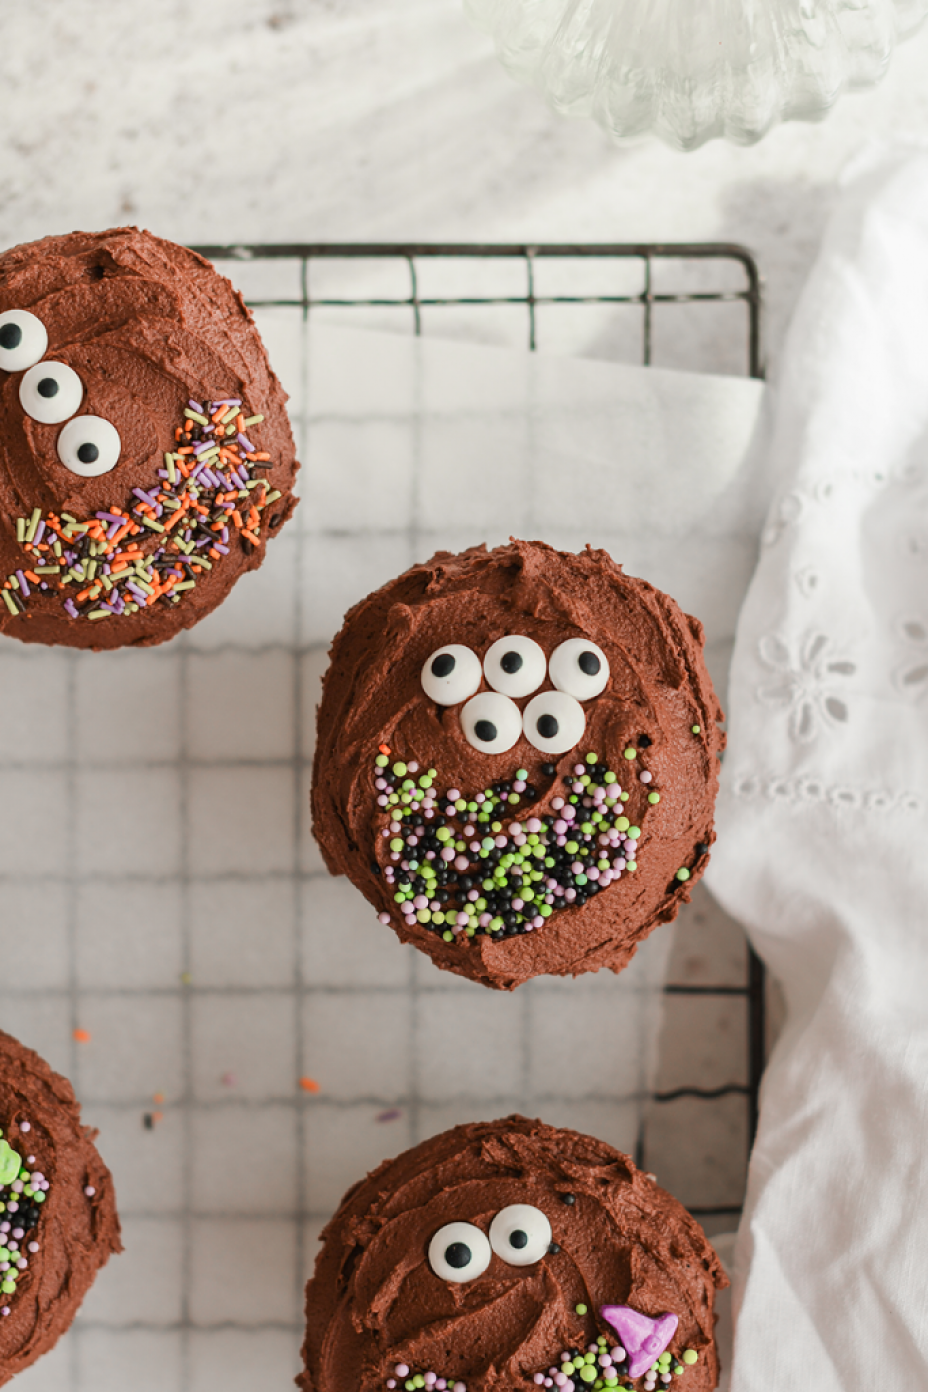 Matcha Mash halloween cupcakes, a spooky treat with a cheeky surprise ingredient